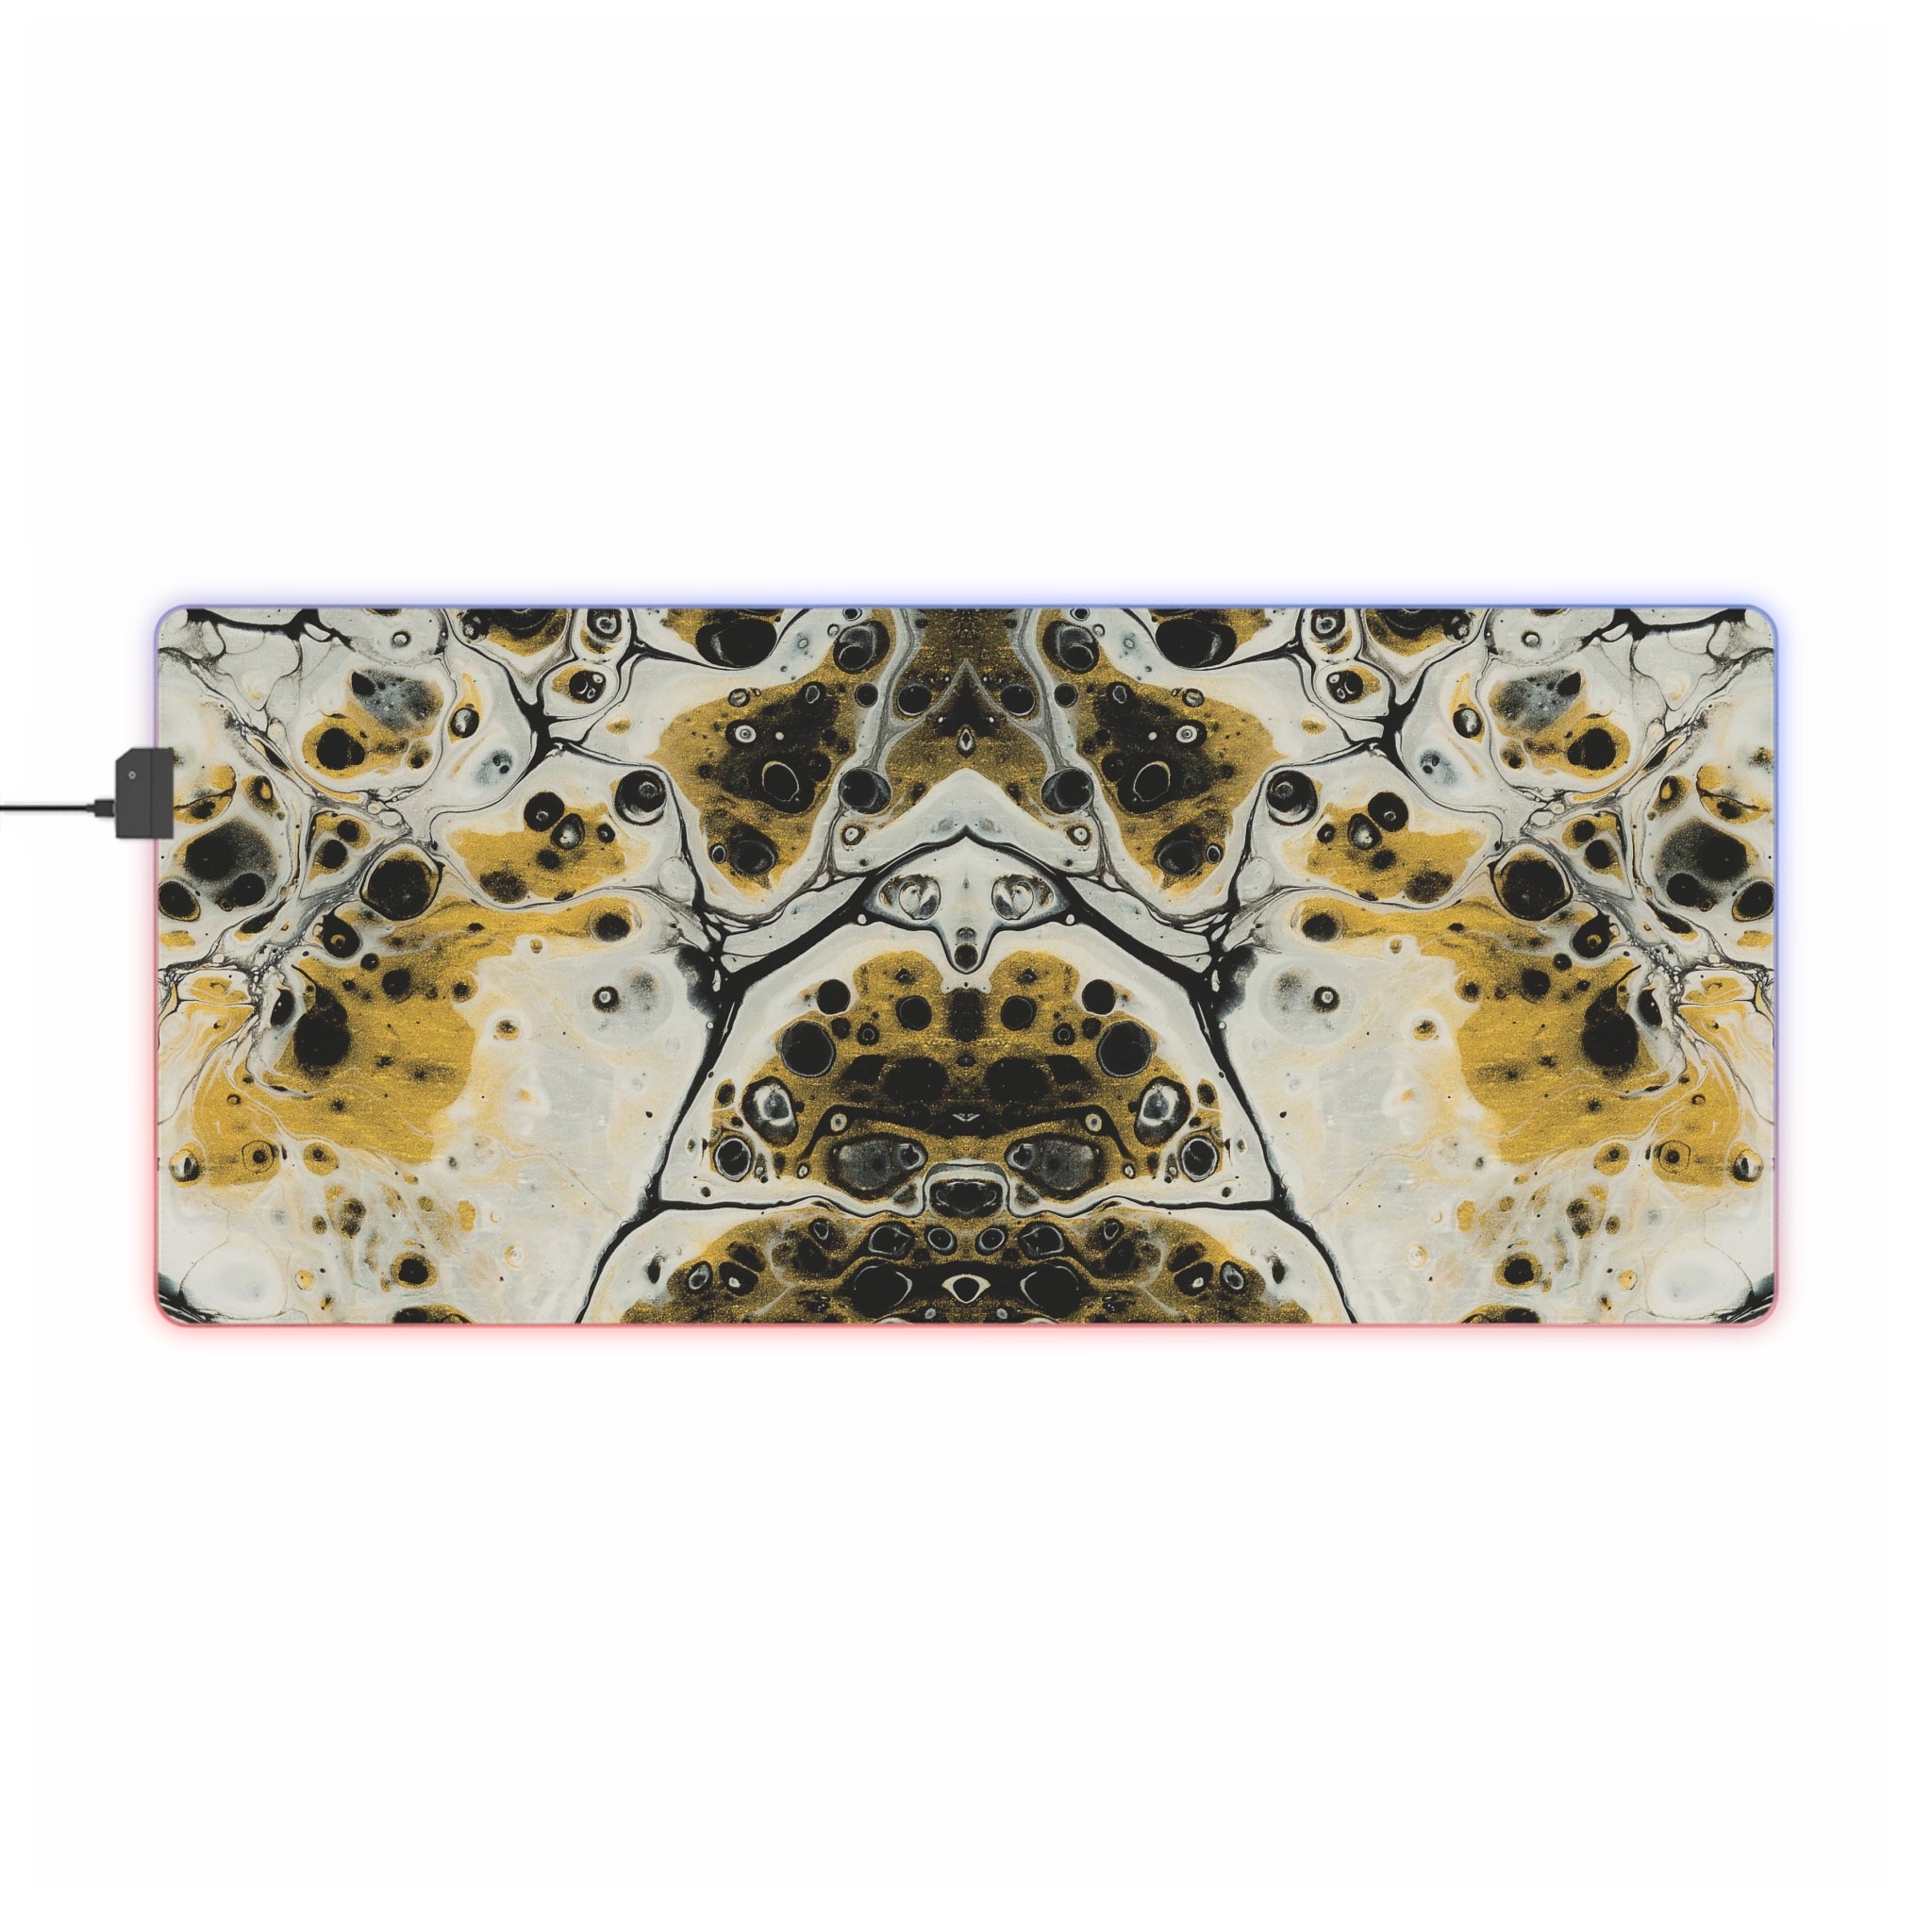 Cameron Creations - LED Gaming Mouse Pad - Golden Ghosts - Flat Image Front